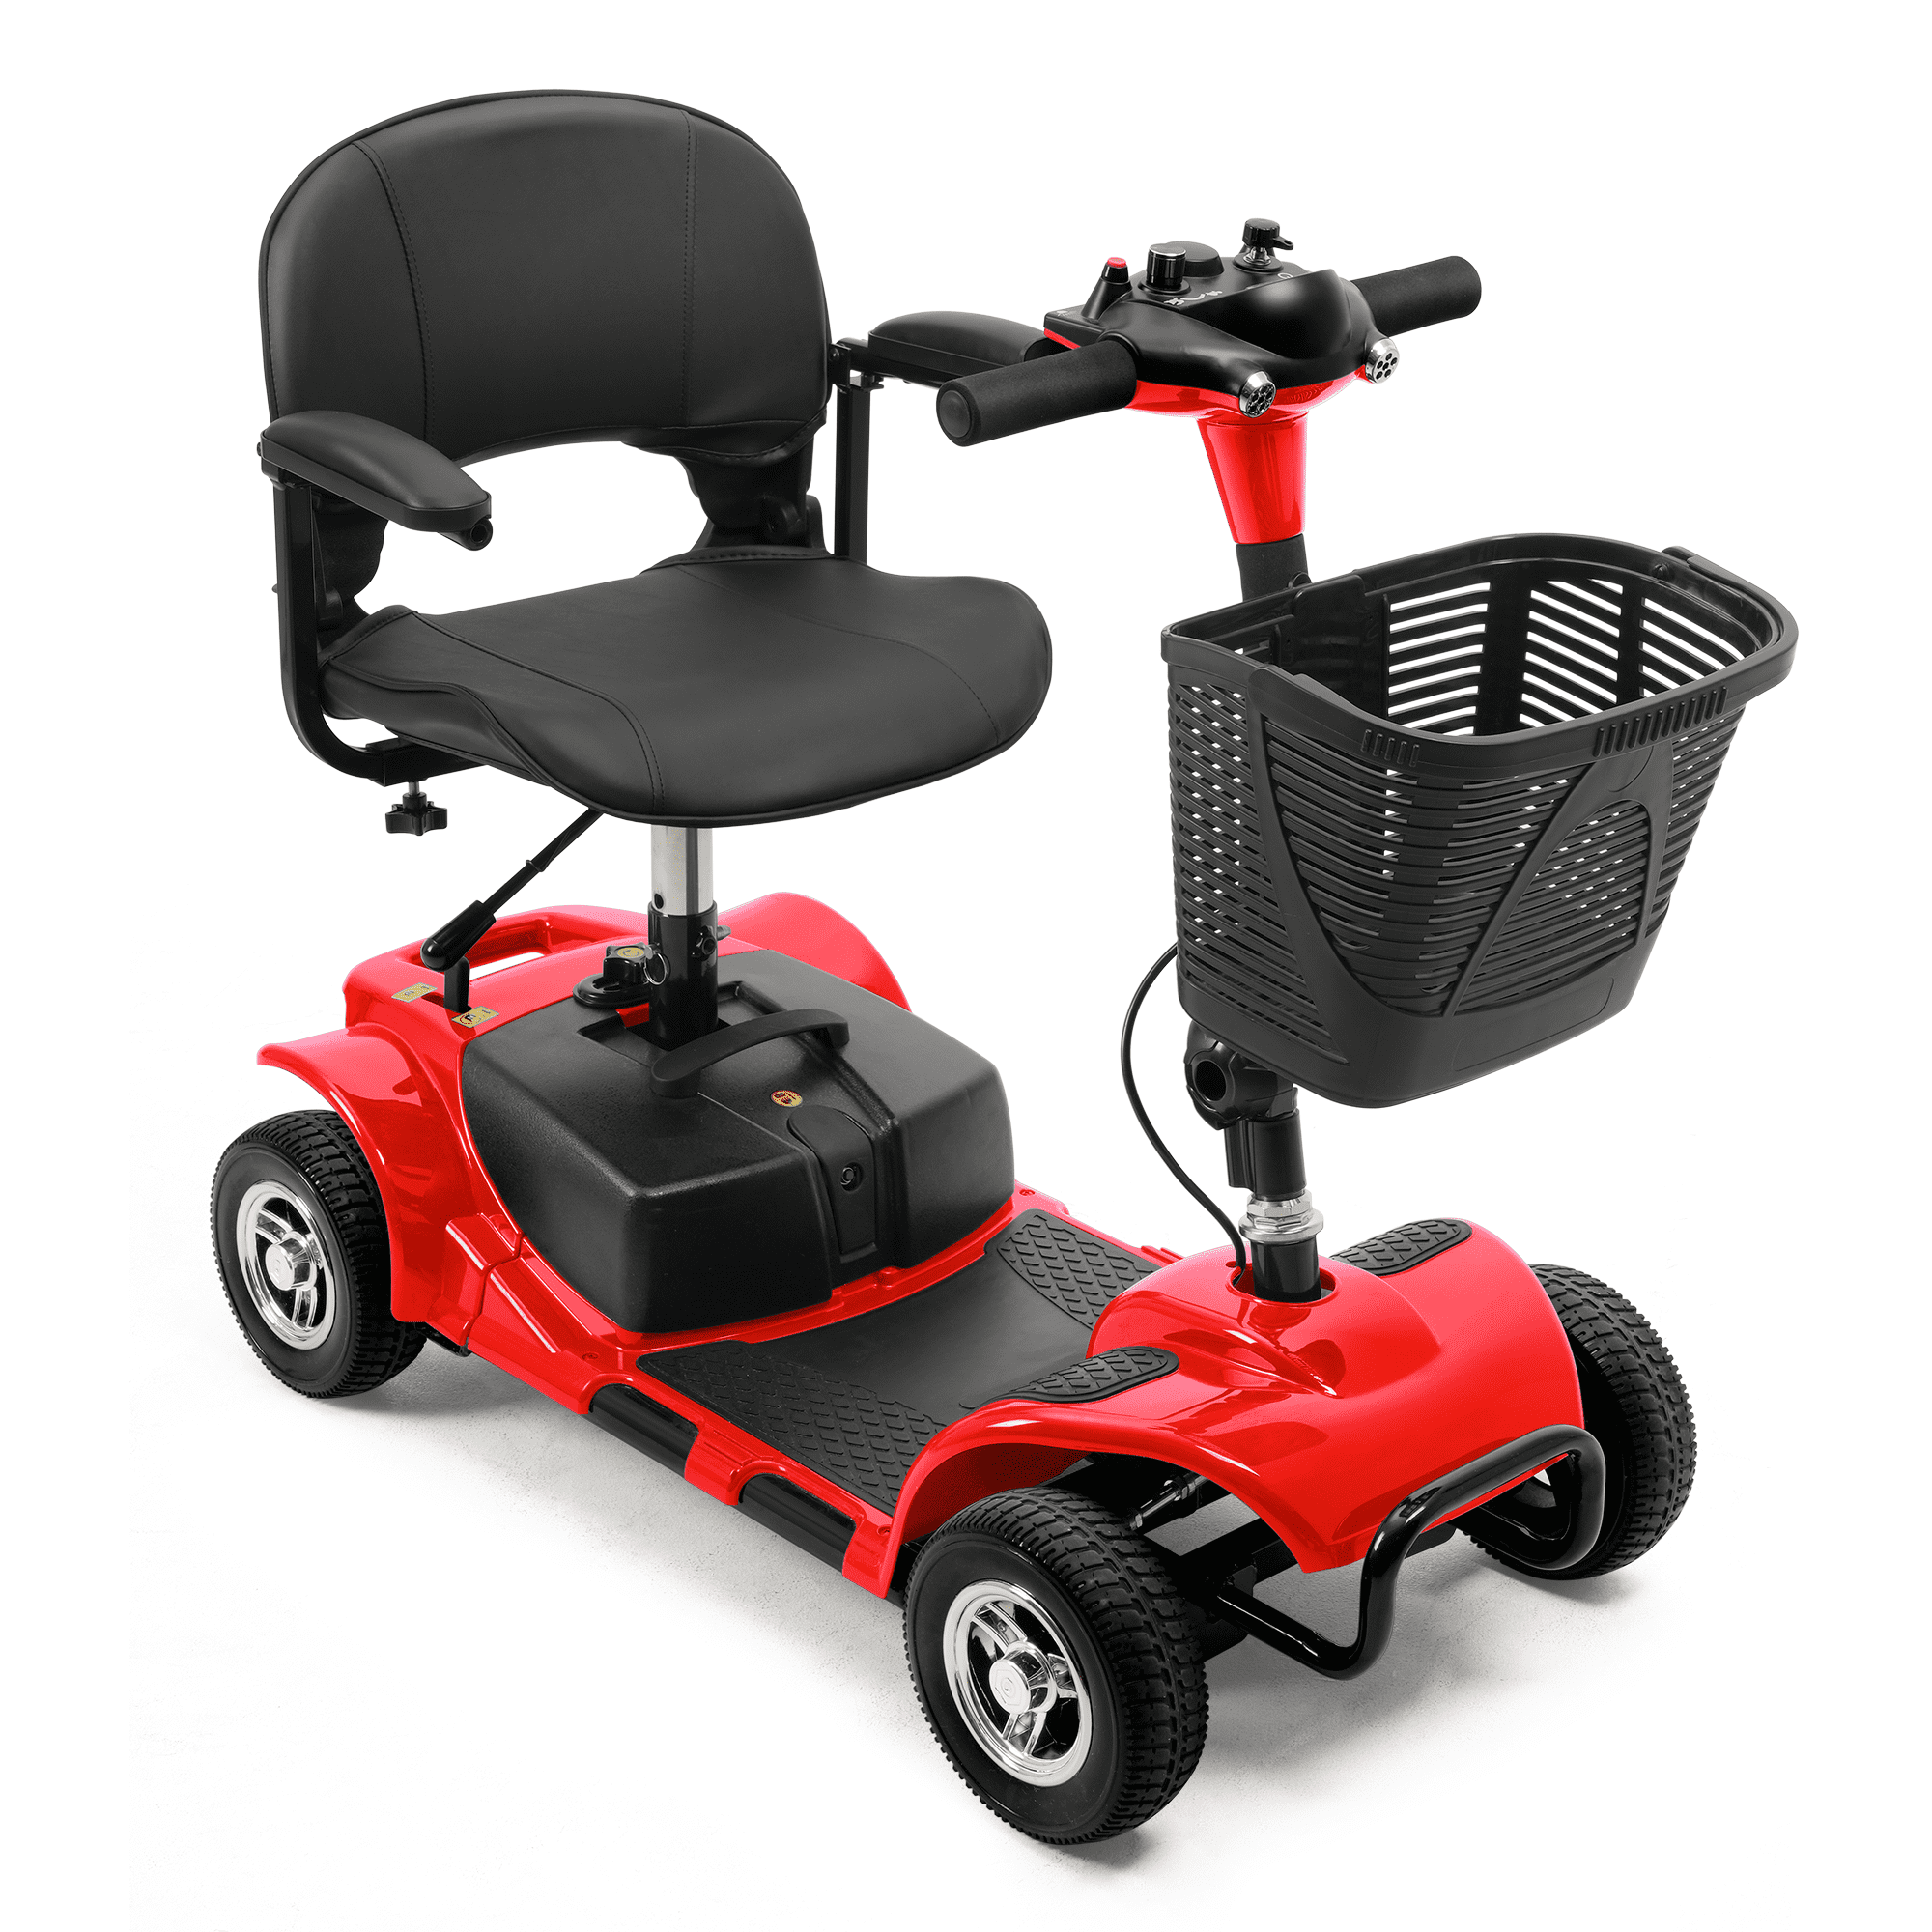 Furgle 4 Mobility Scooter, Electric Powered Wheelchair Device for Travel, Adults, - Walmart.com